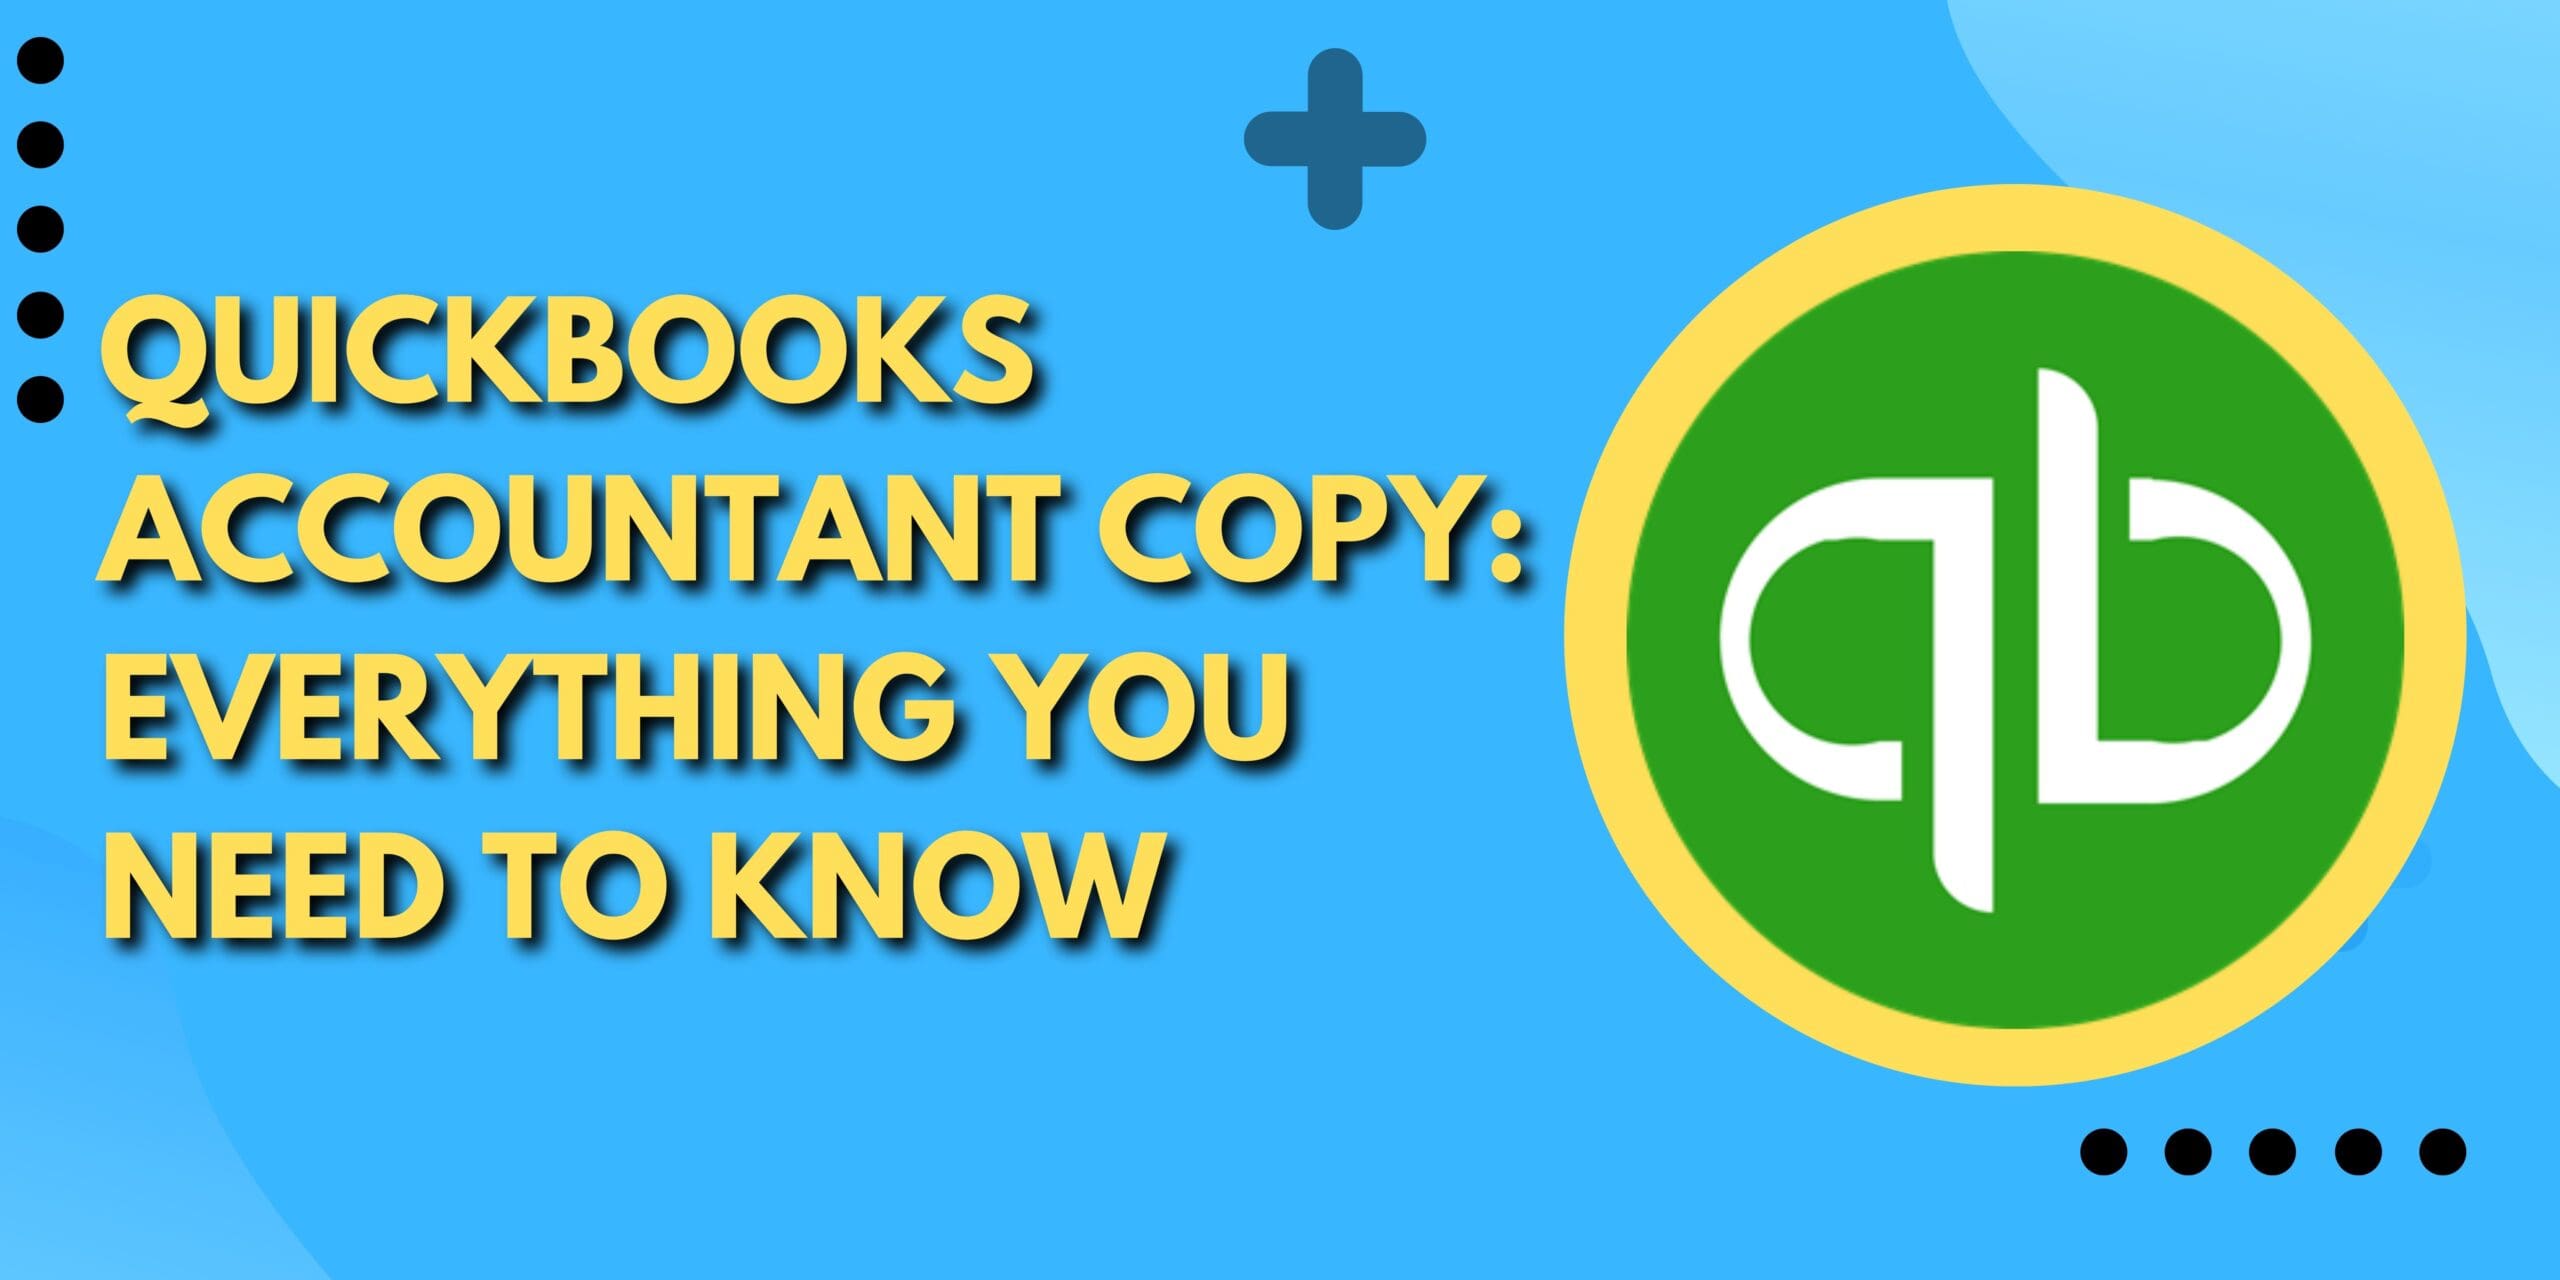 QuickBooks Accountant Copy: A Full Fledged Manual To Users